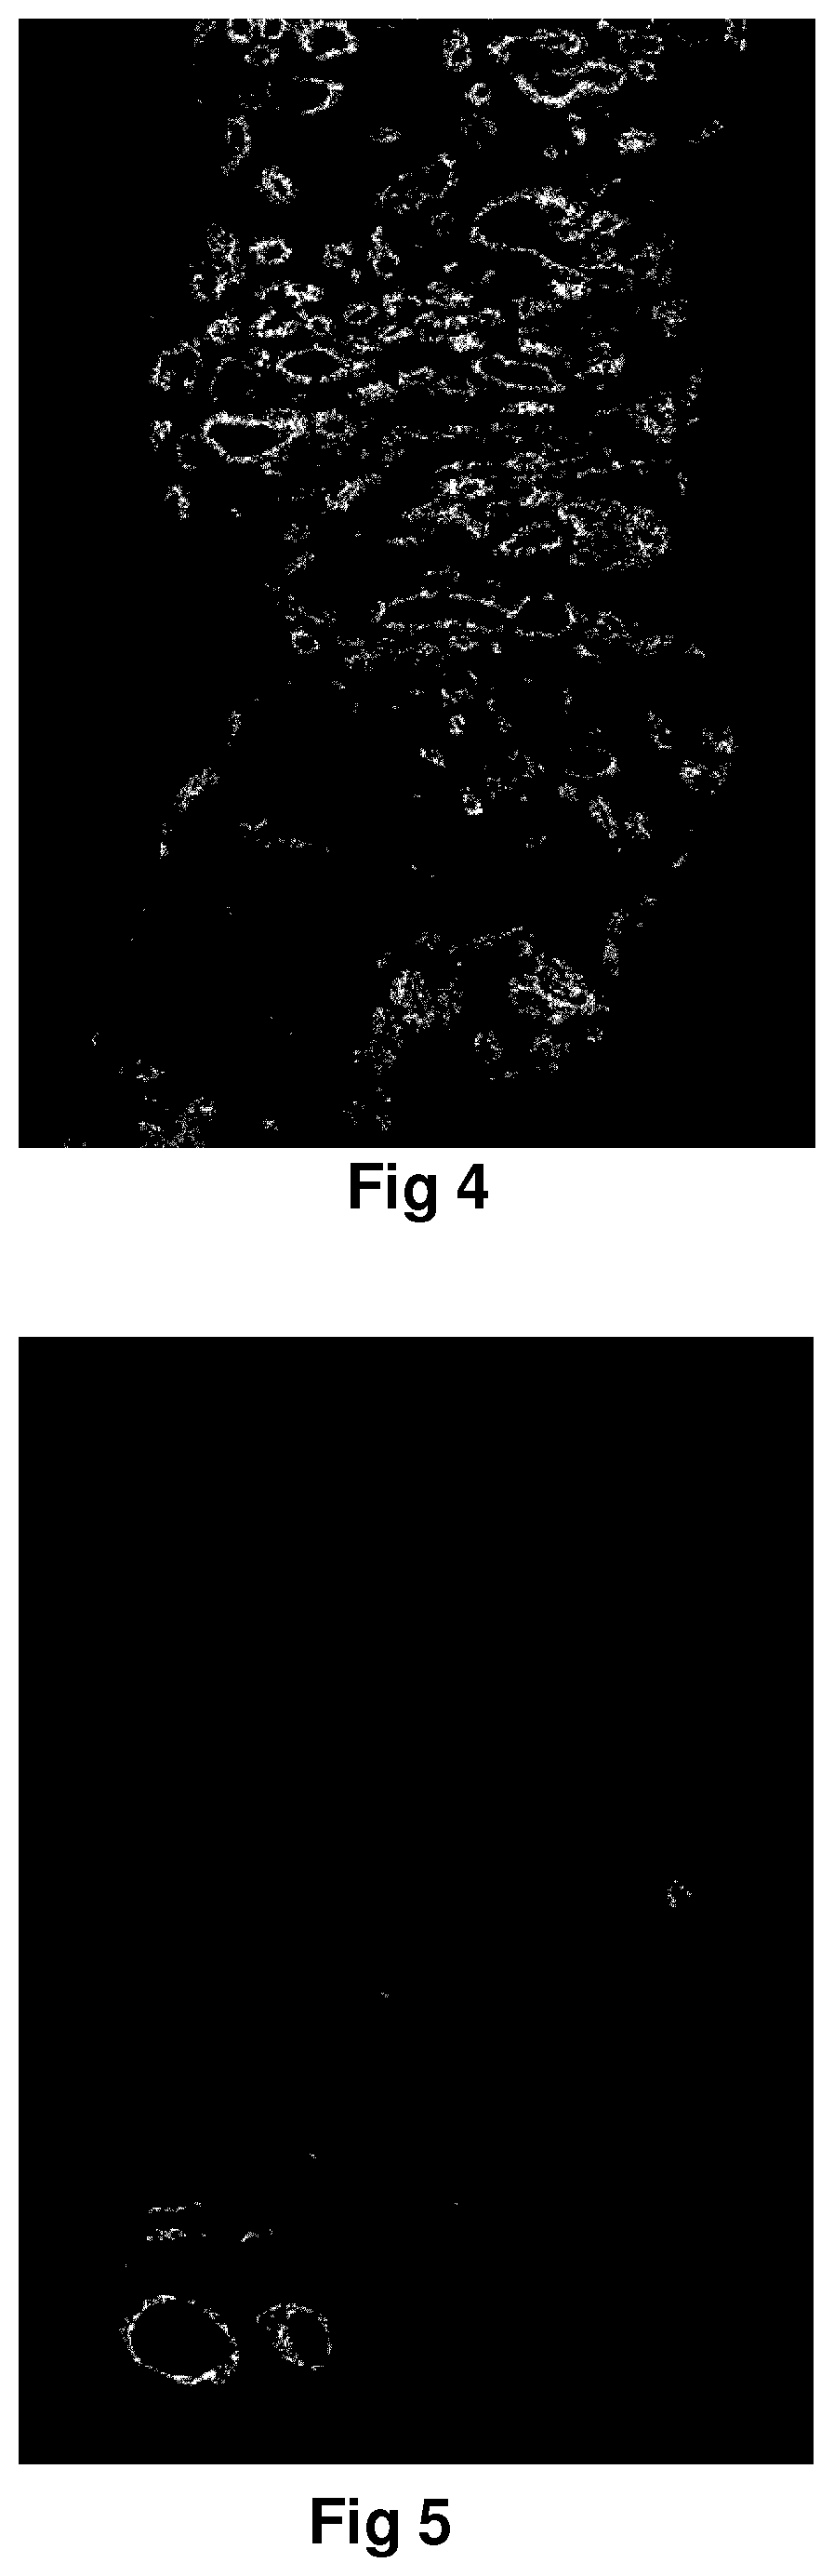 Method for identification of different categories of biopsy sample images